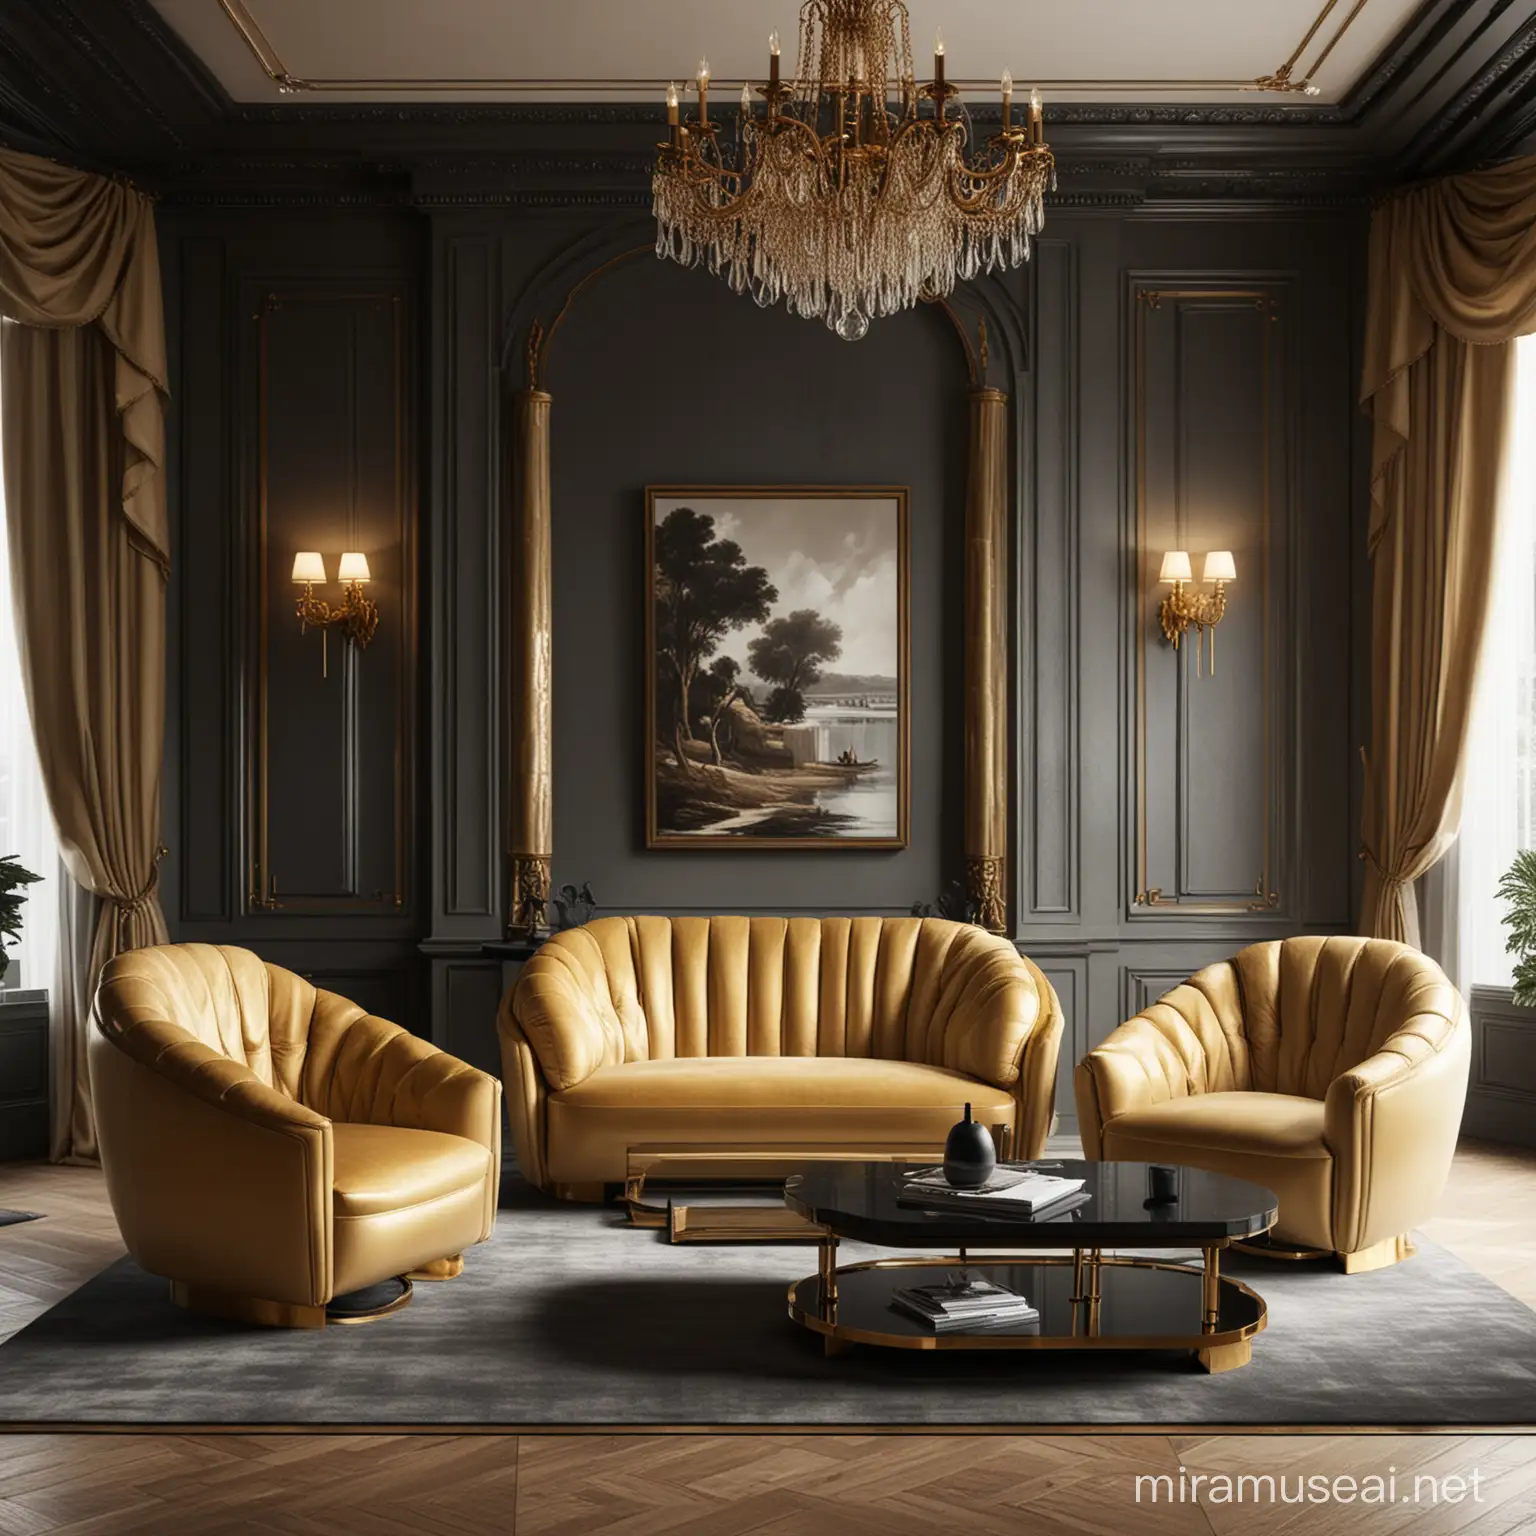 Elegant Sofa Design in a Luxurious Interior with Breathtaking View